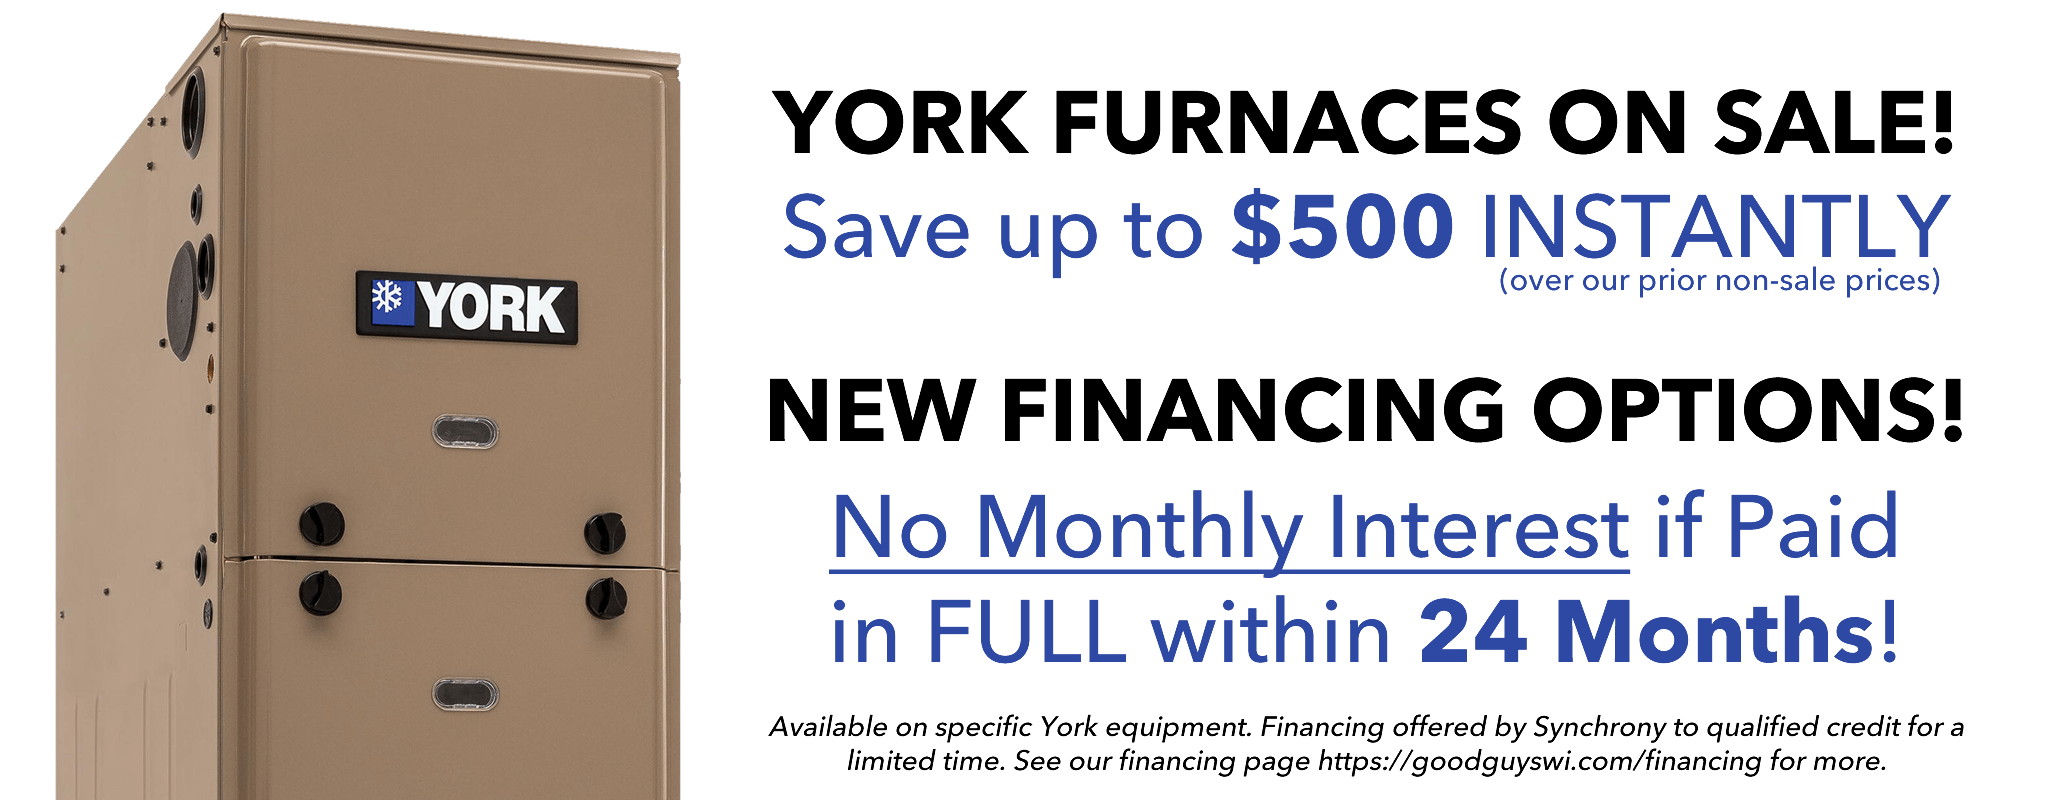 York Furnaces on sale! Save up to $500 instantly (over our prior non-sale prices) New Financing Options! No Monthly Interest in paid in full within 24 Months! Available on specific york equipment. Financing offered by Synchrony to qualified credit for a limited time. See our financing page https://goodguyswi.com/financing for more.